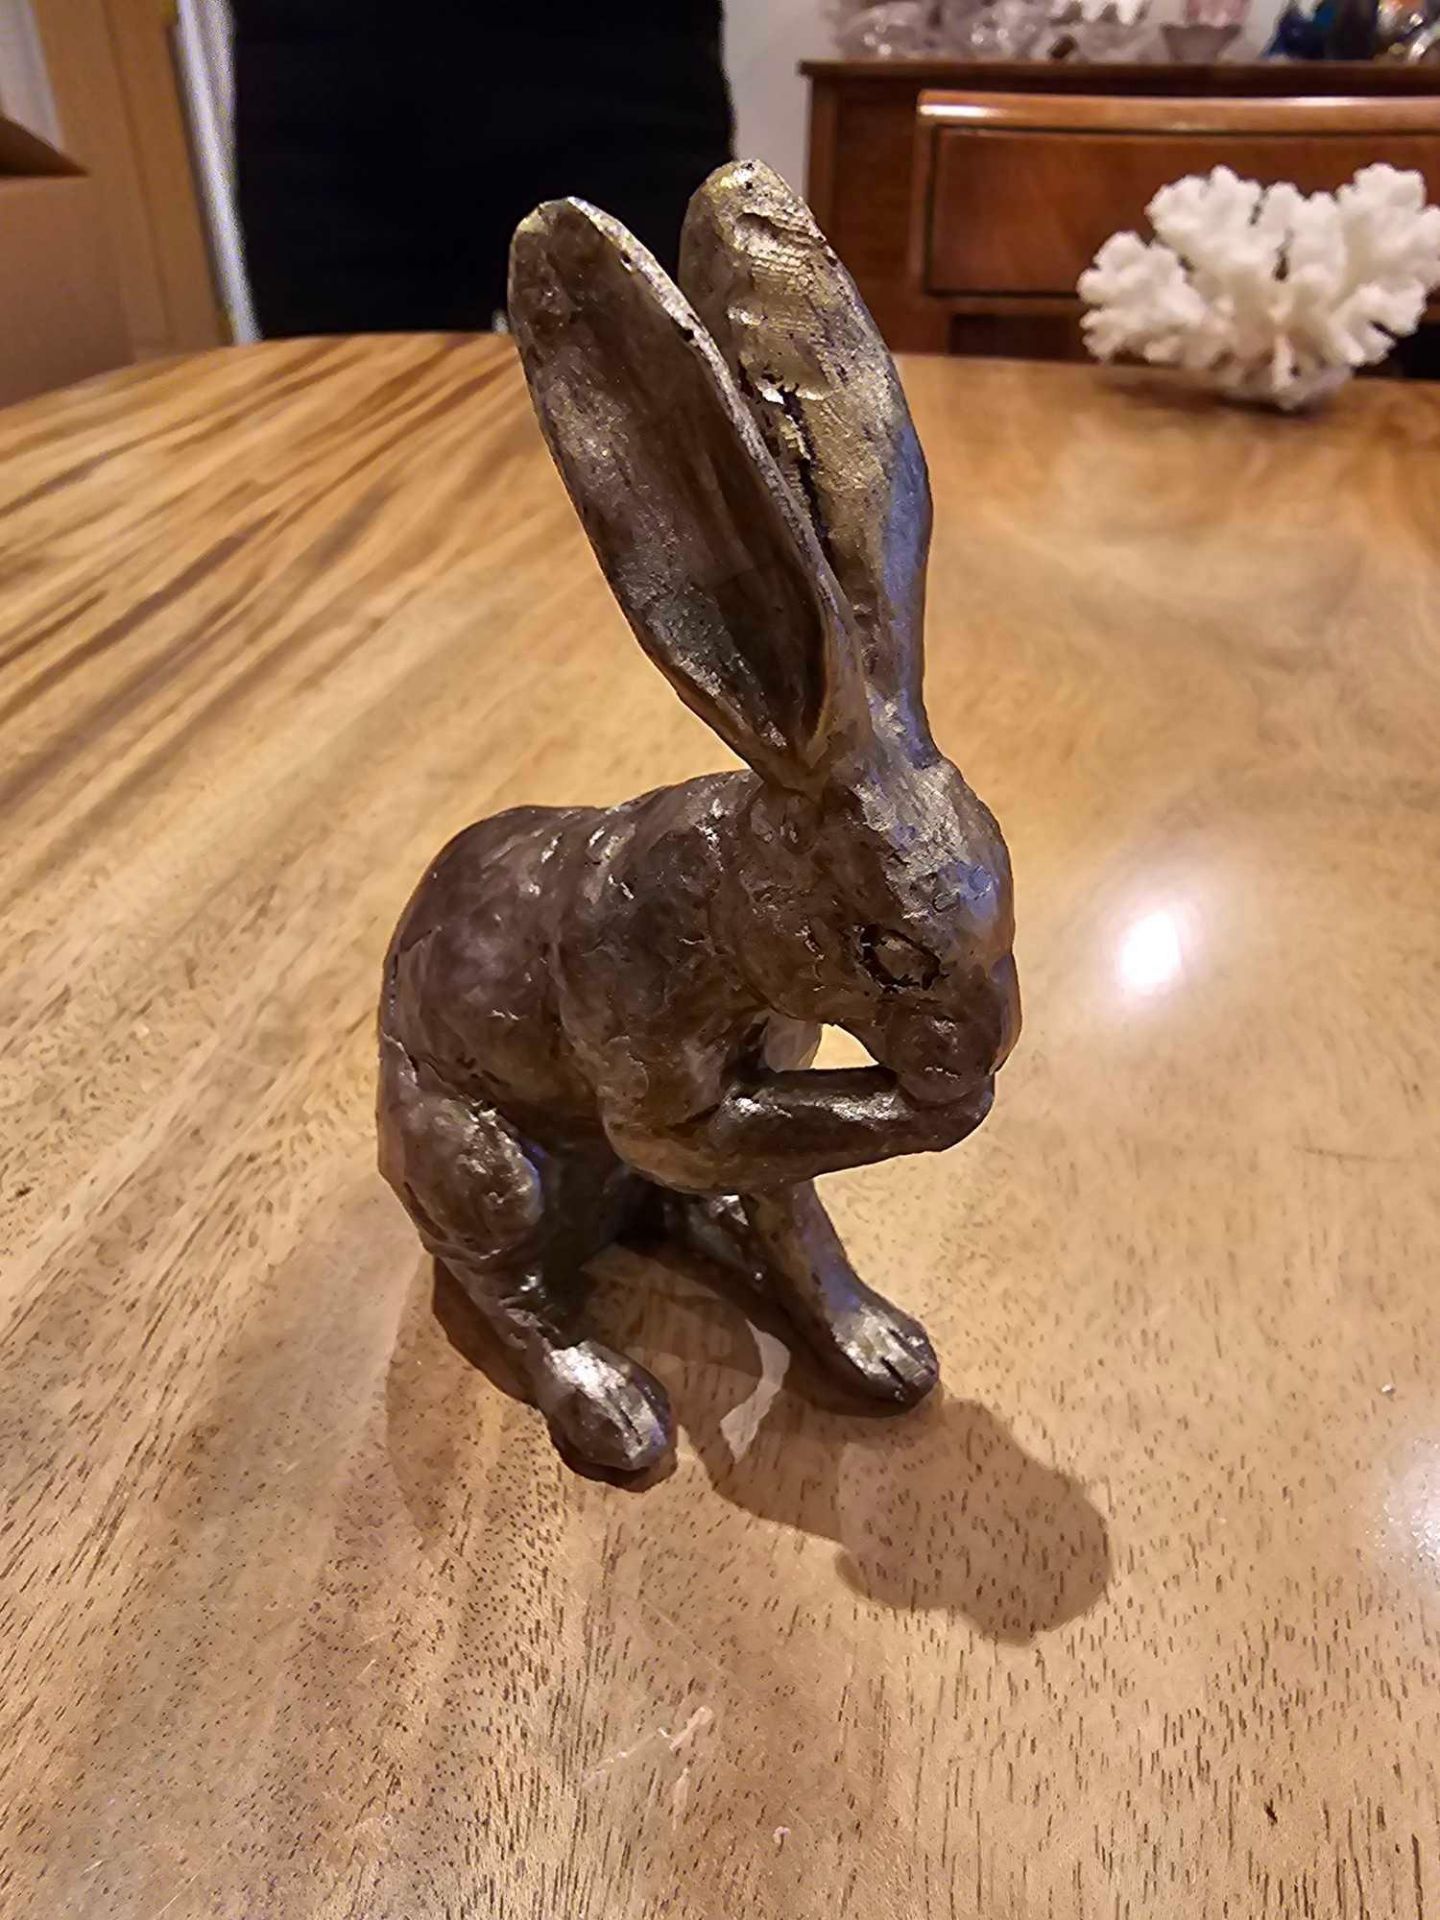 A Bronzed Resin Miniature Figurine Of A Rabbit - Image 2 of 2